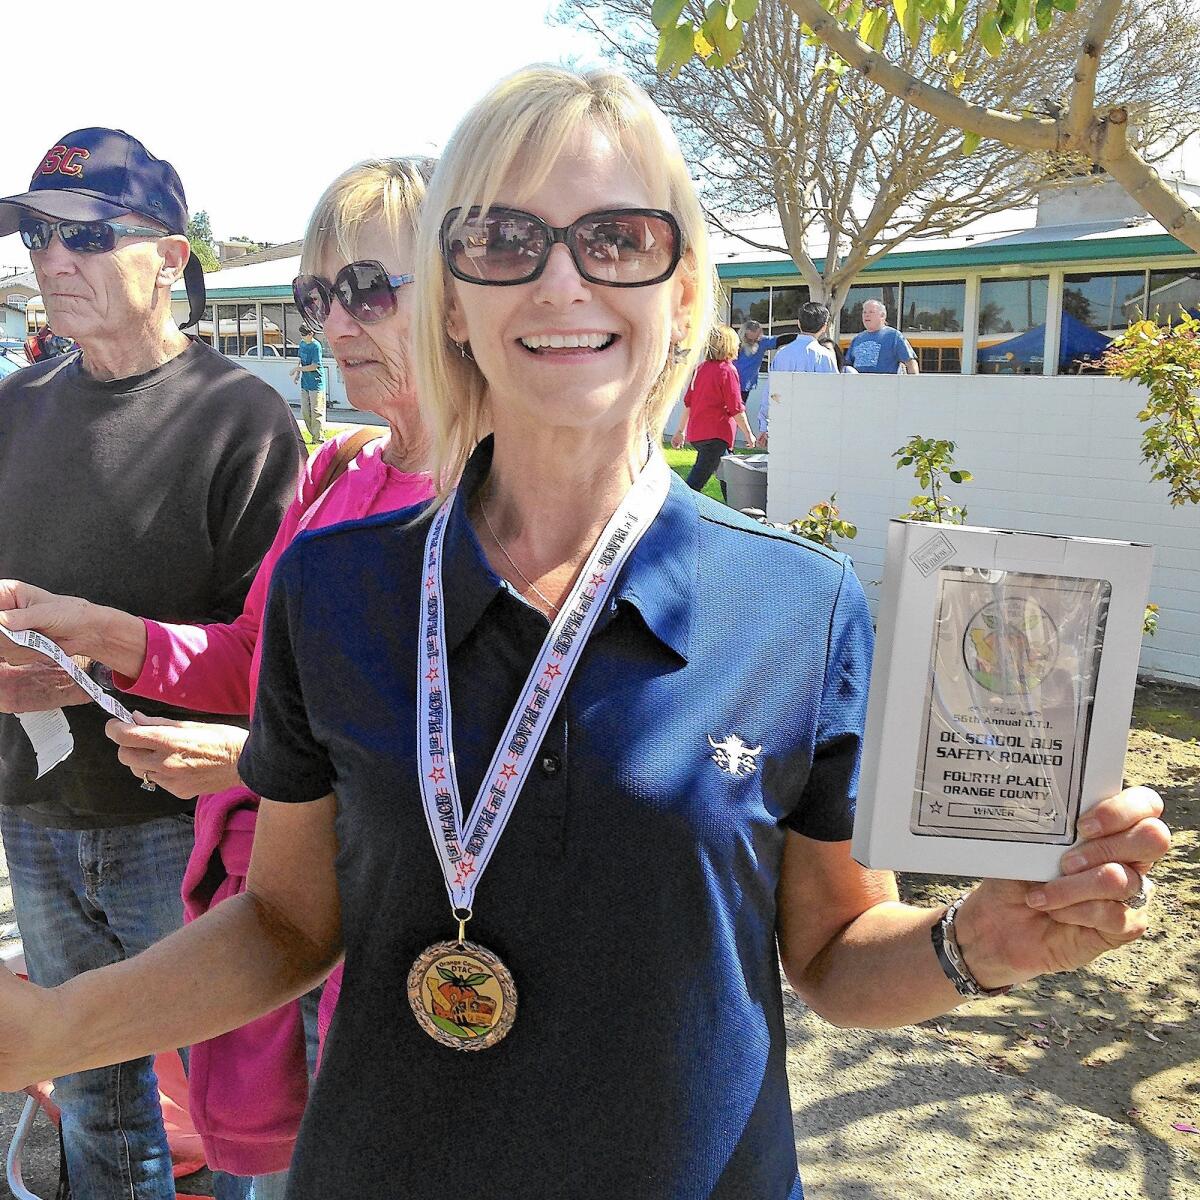 Juliann Scheafer, a bus driver for the Newport-Mesa Unified School District, took home a Fourth Place Individual award from the Orange County School Bus Roadeo in Garden Grove Saturday.